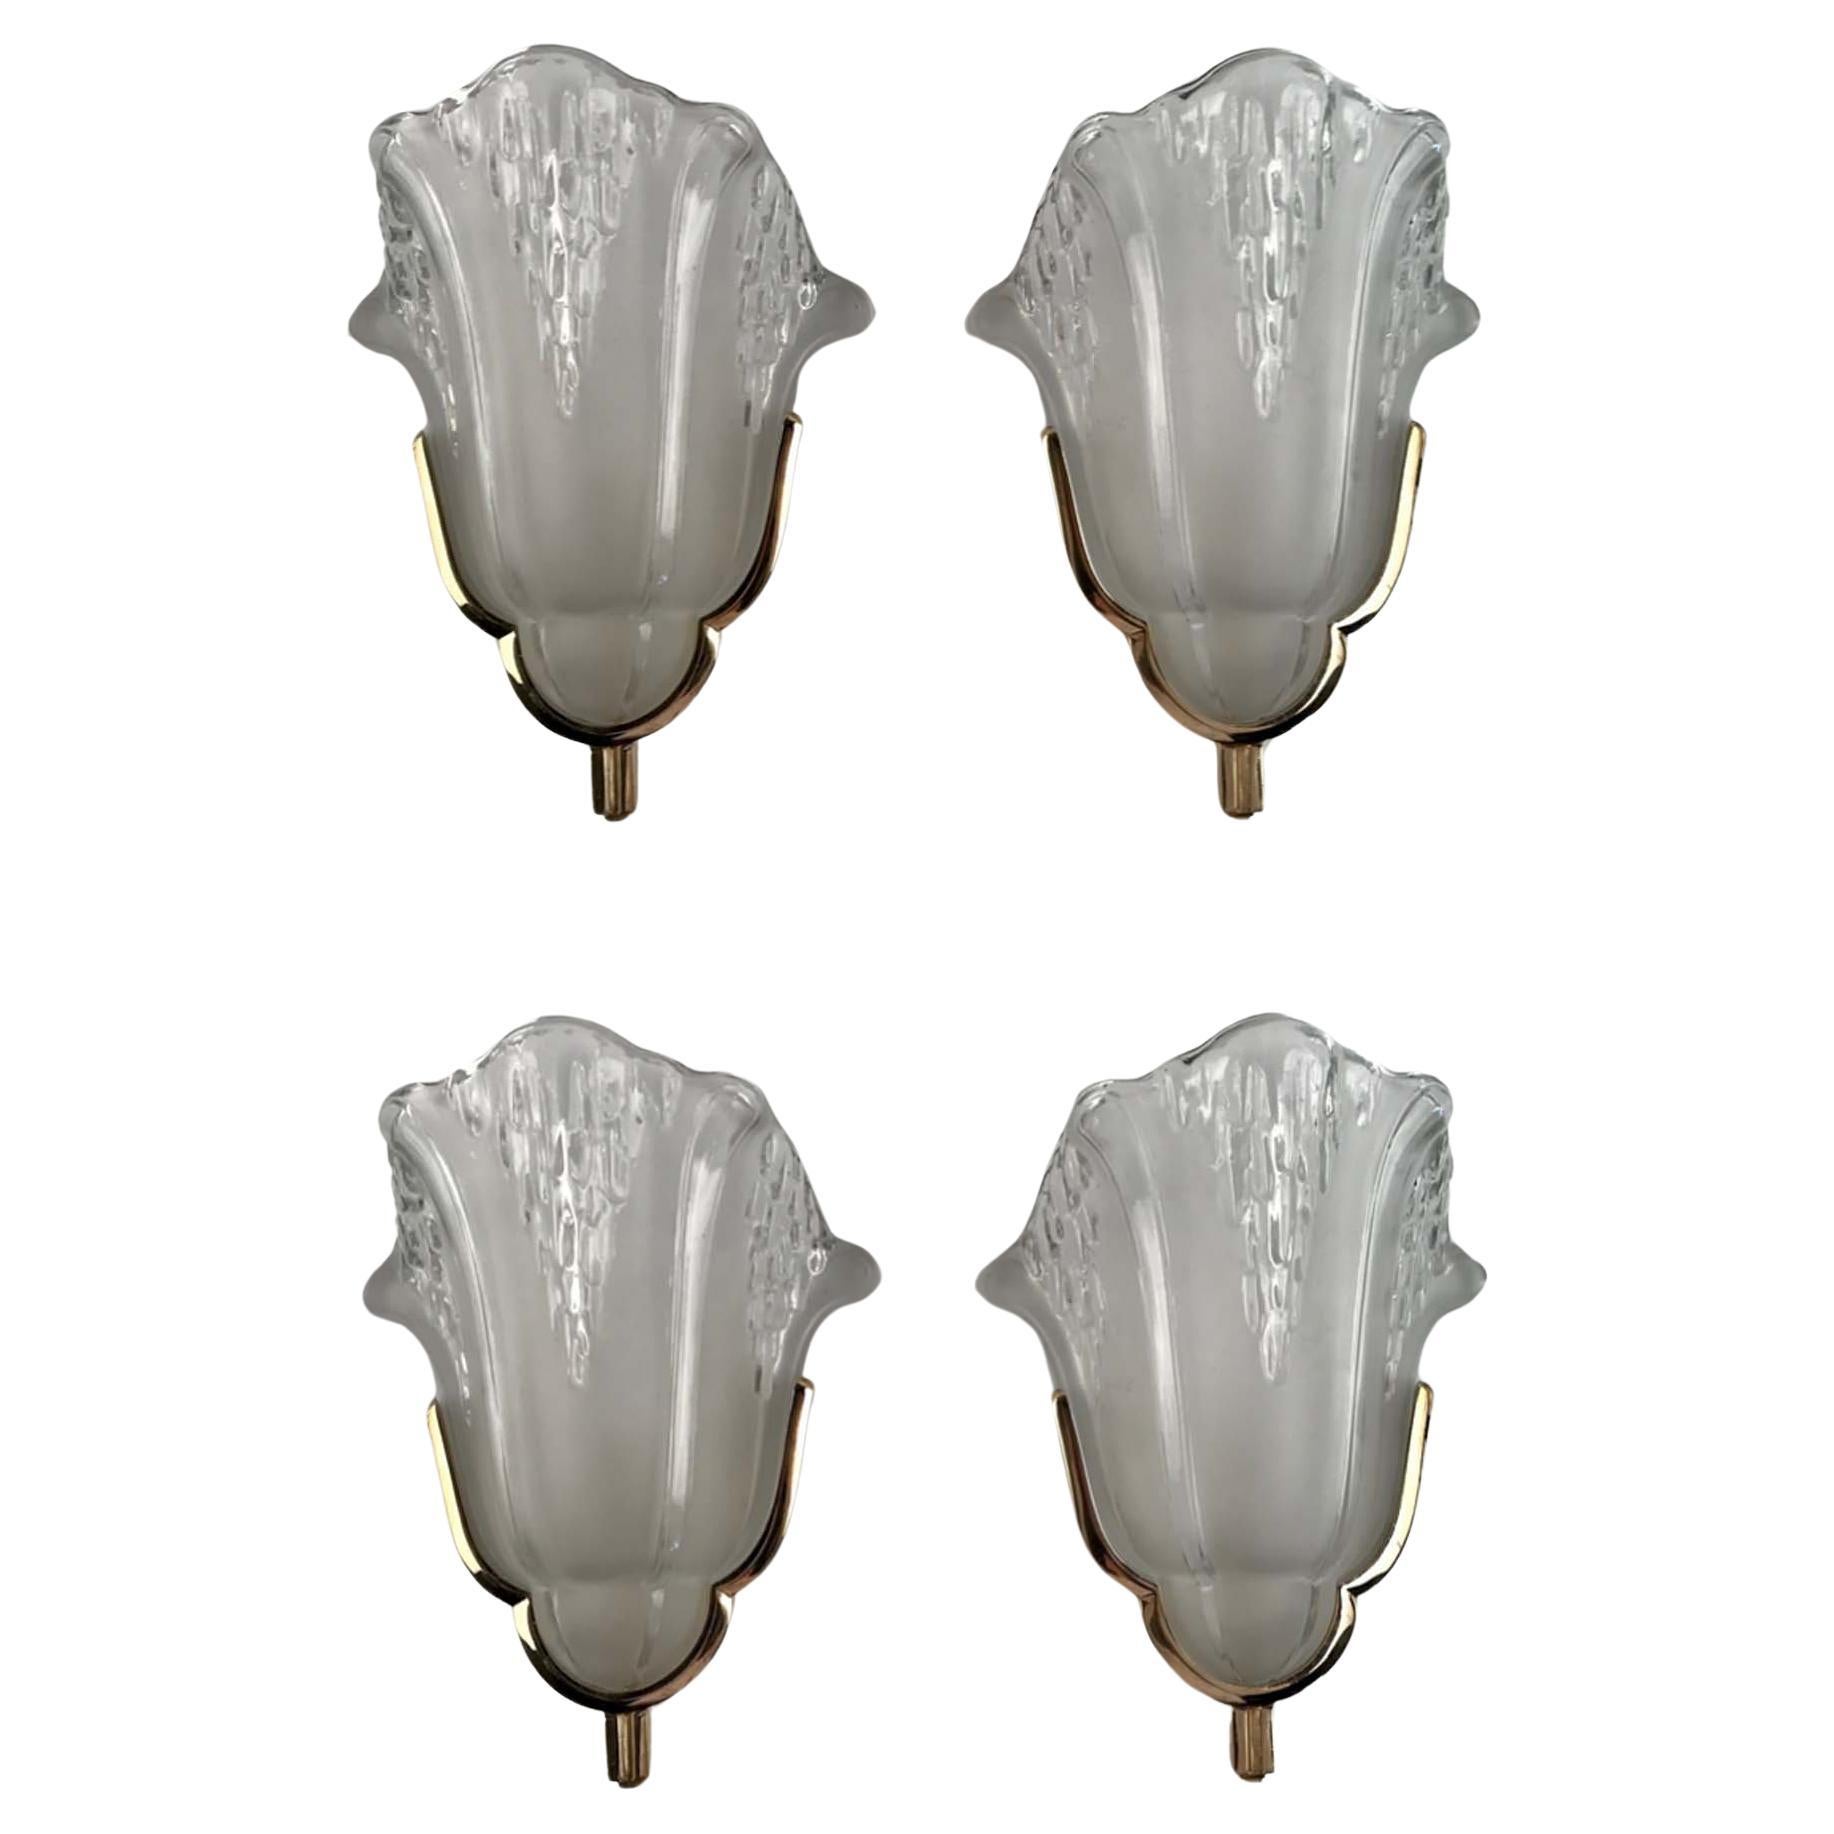  French Art Deco Wall Sconces by Petitot, 1930 Set of Four For Sale